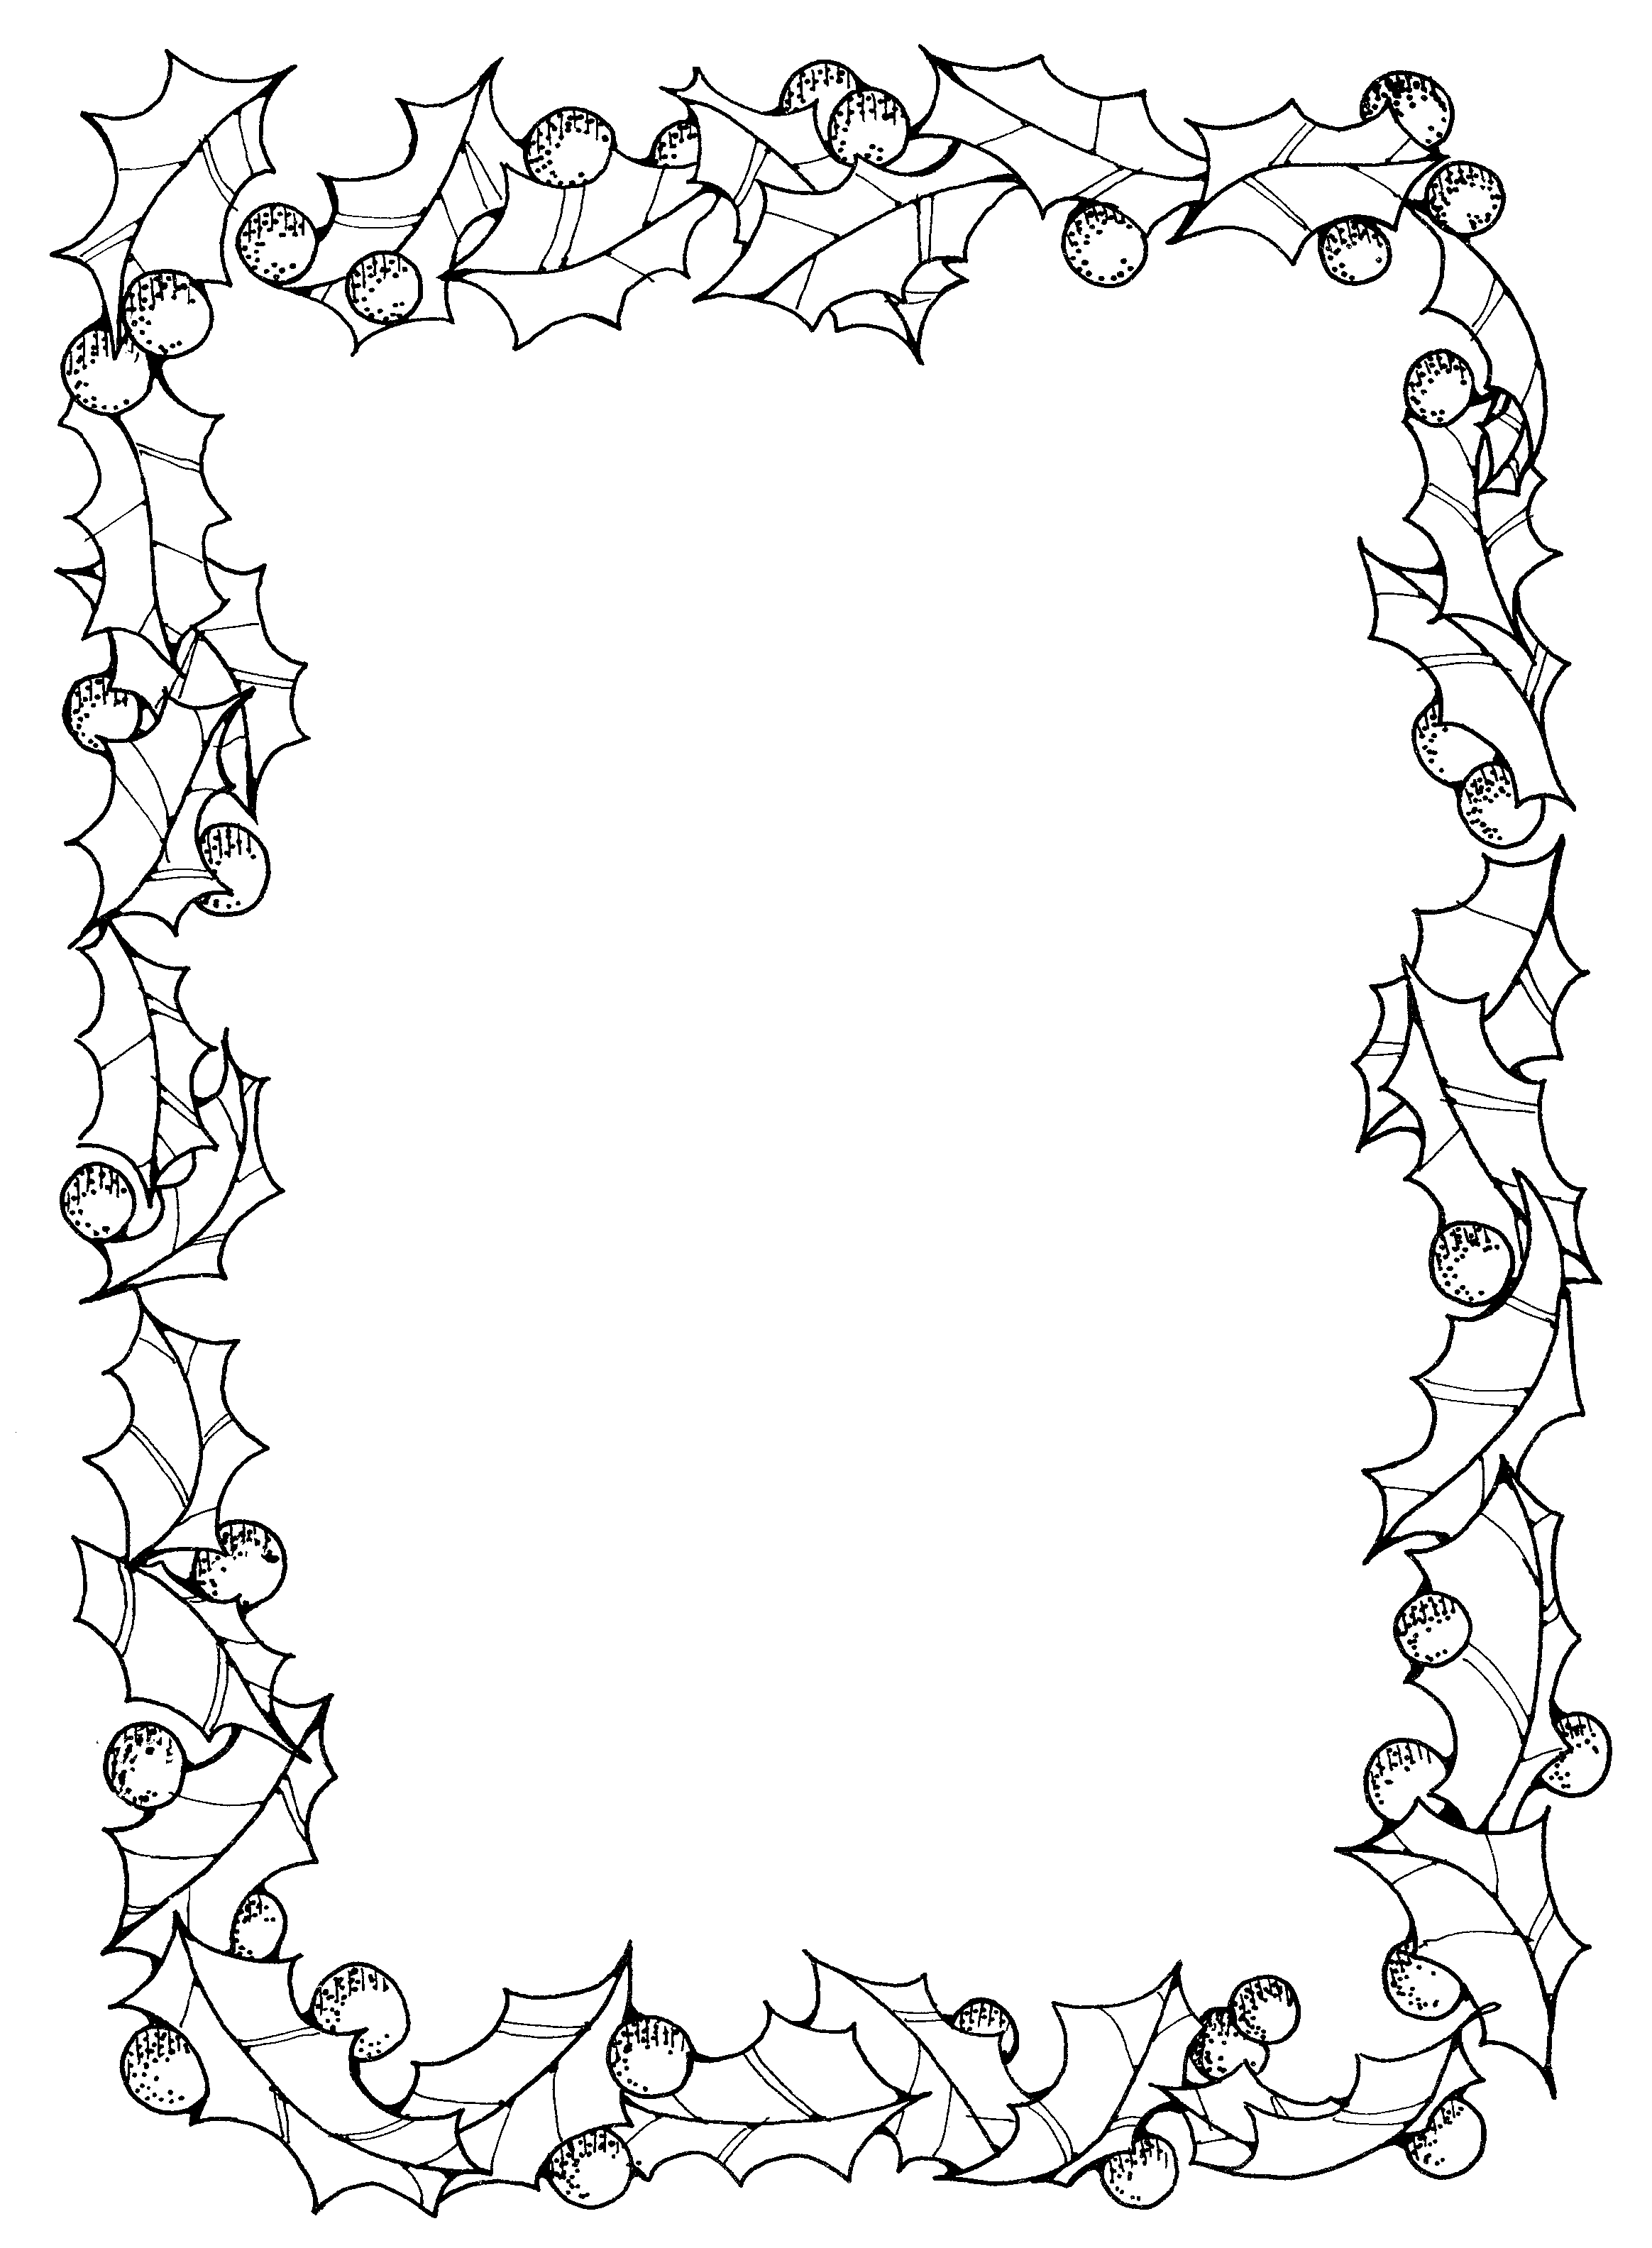 Black And White Christmas Borders   Cliparts Co